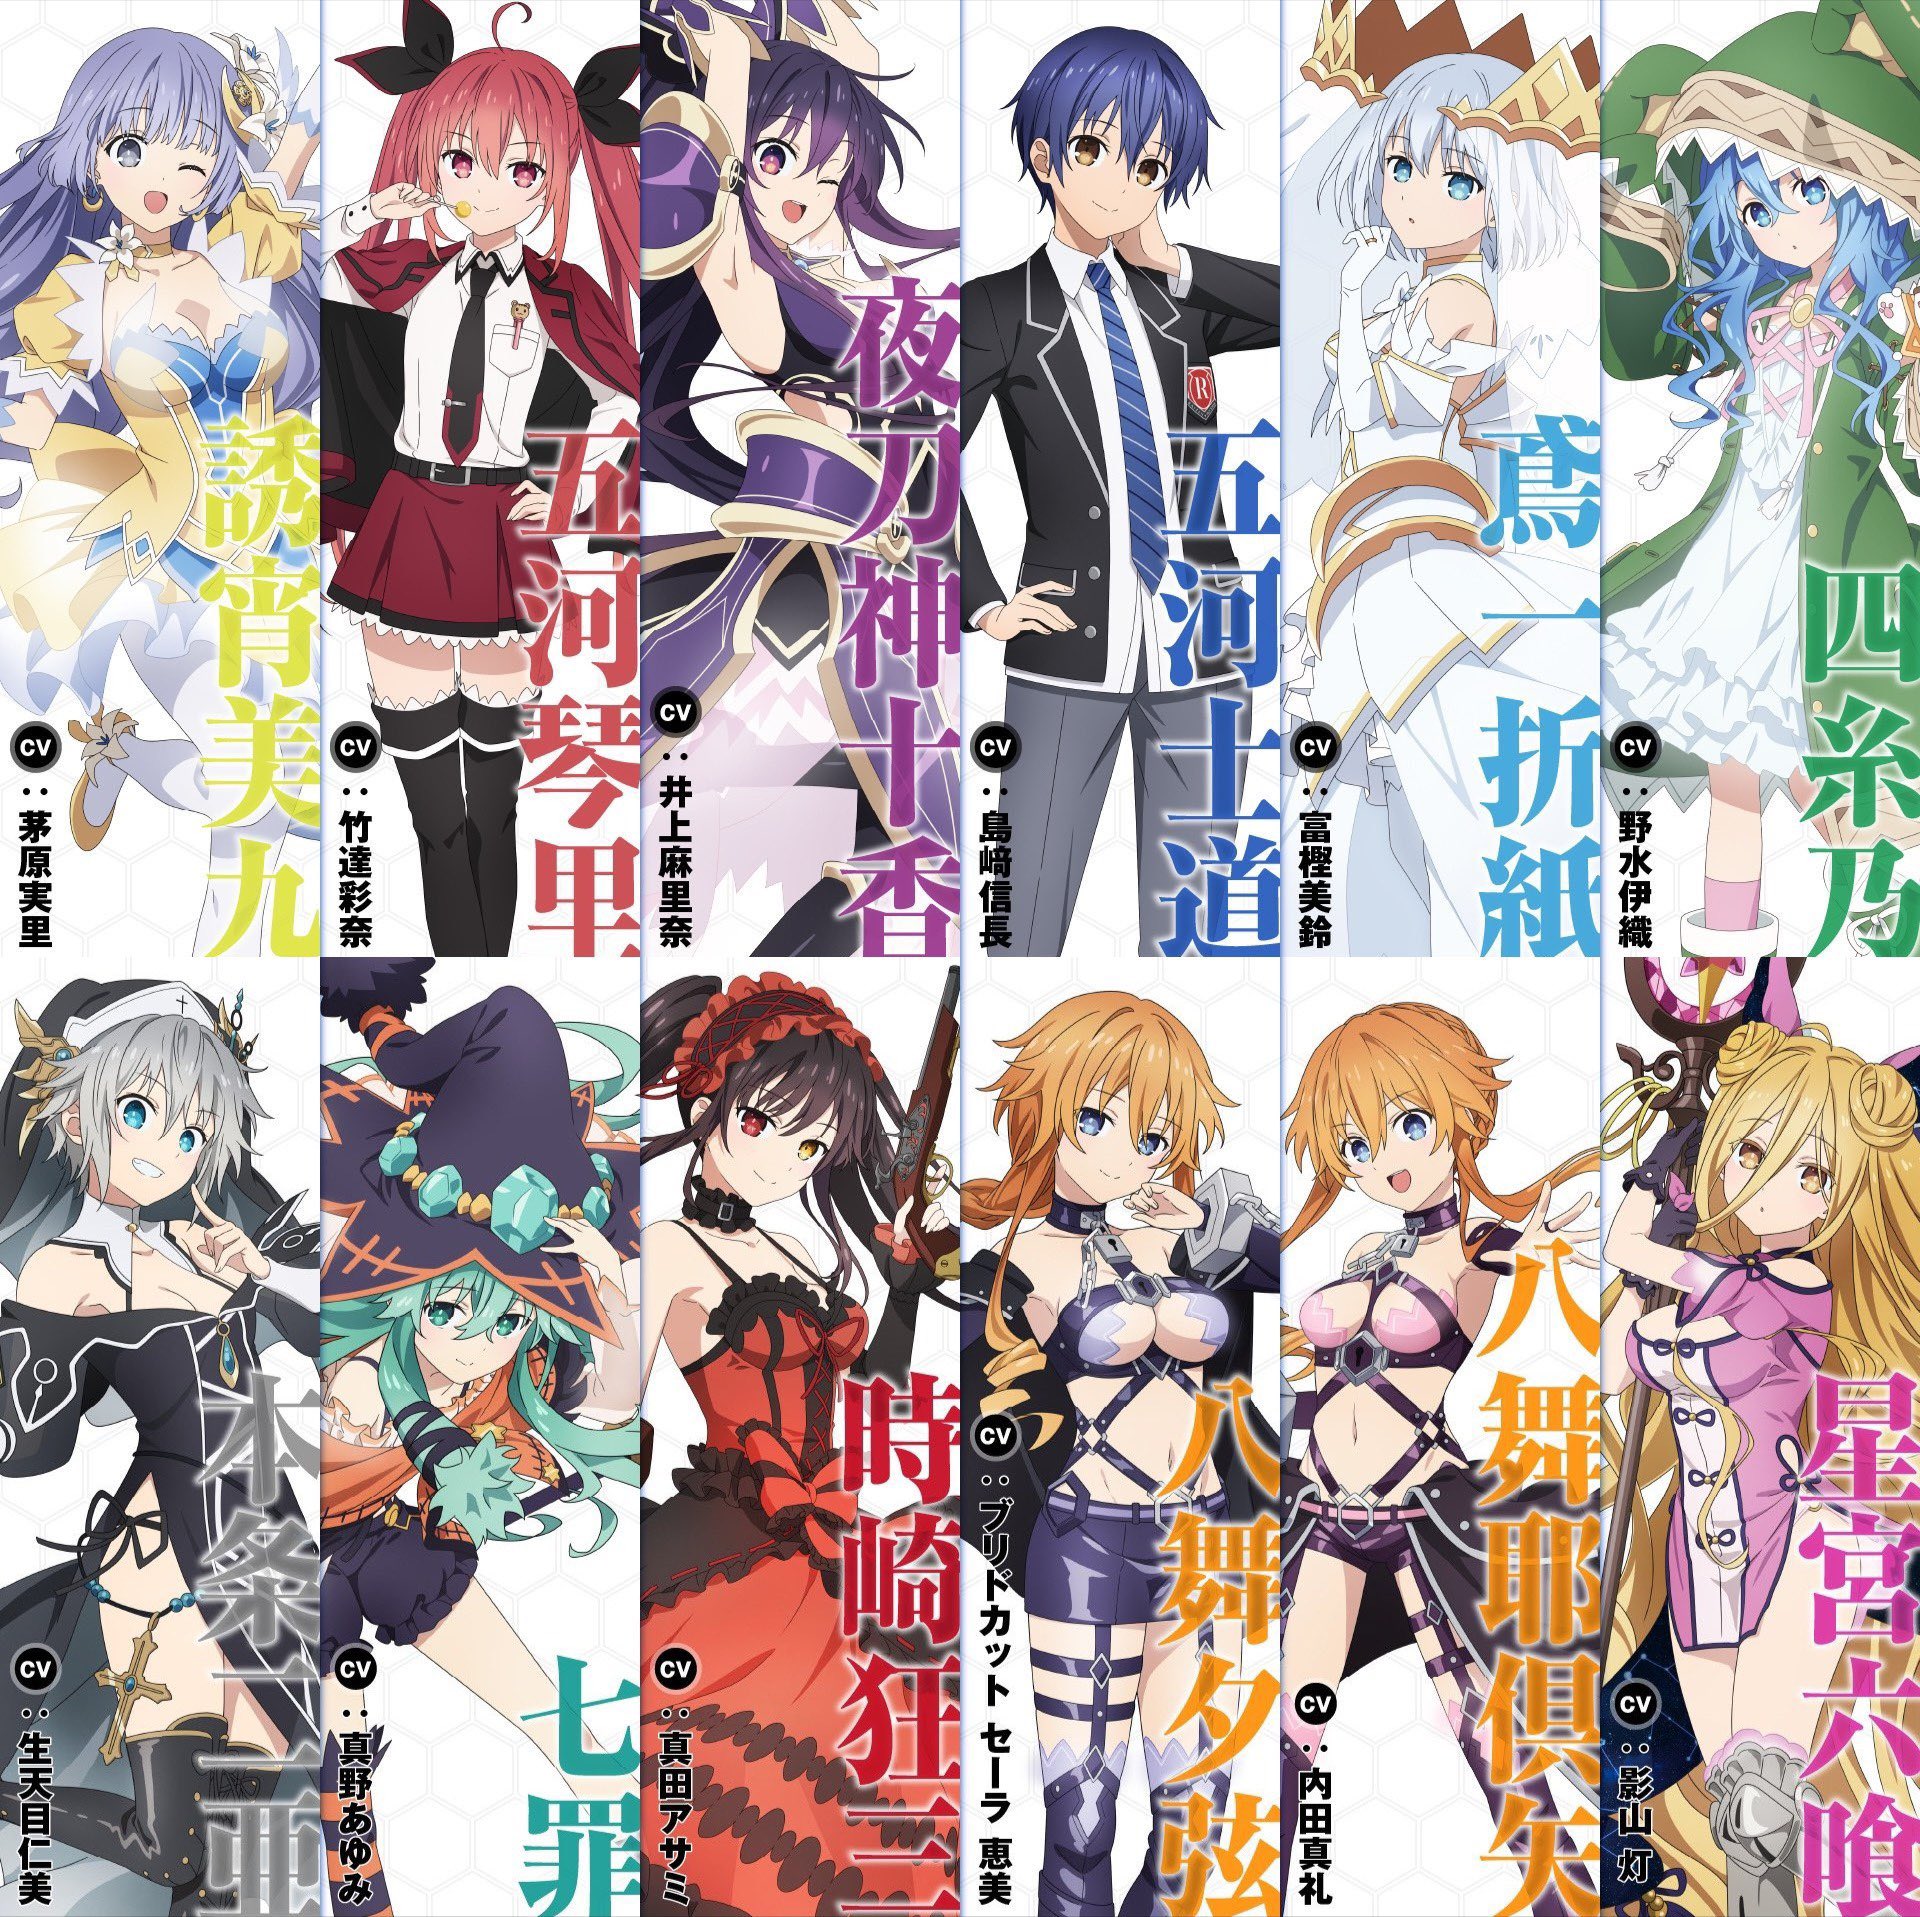 Date a Live V Reveals Second Set of Character Visuals